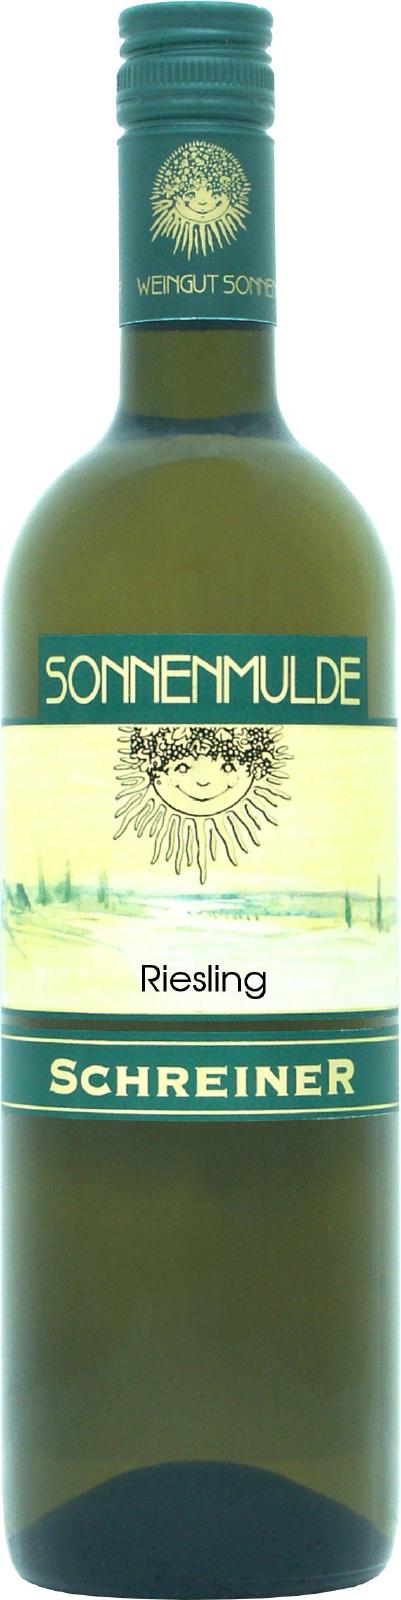 A bottle of Riesling